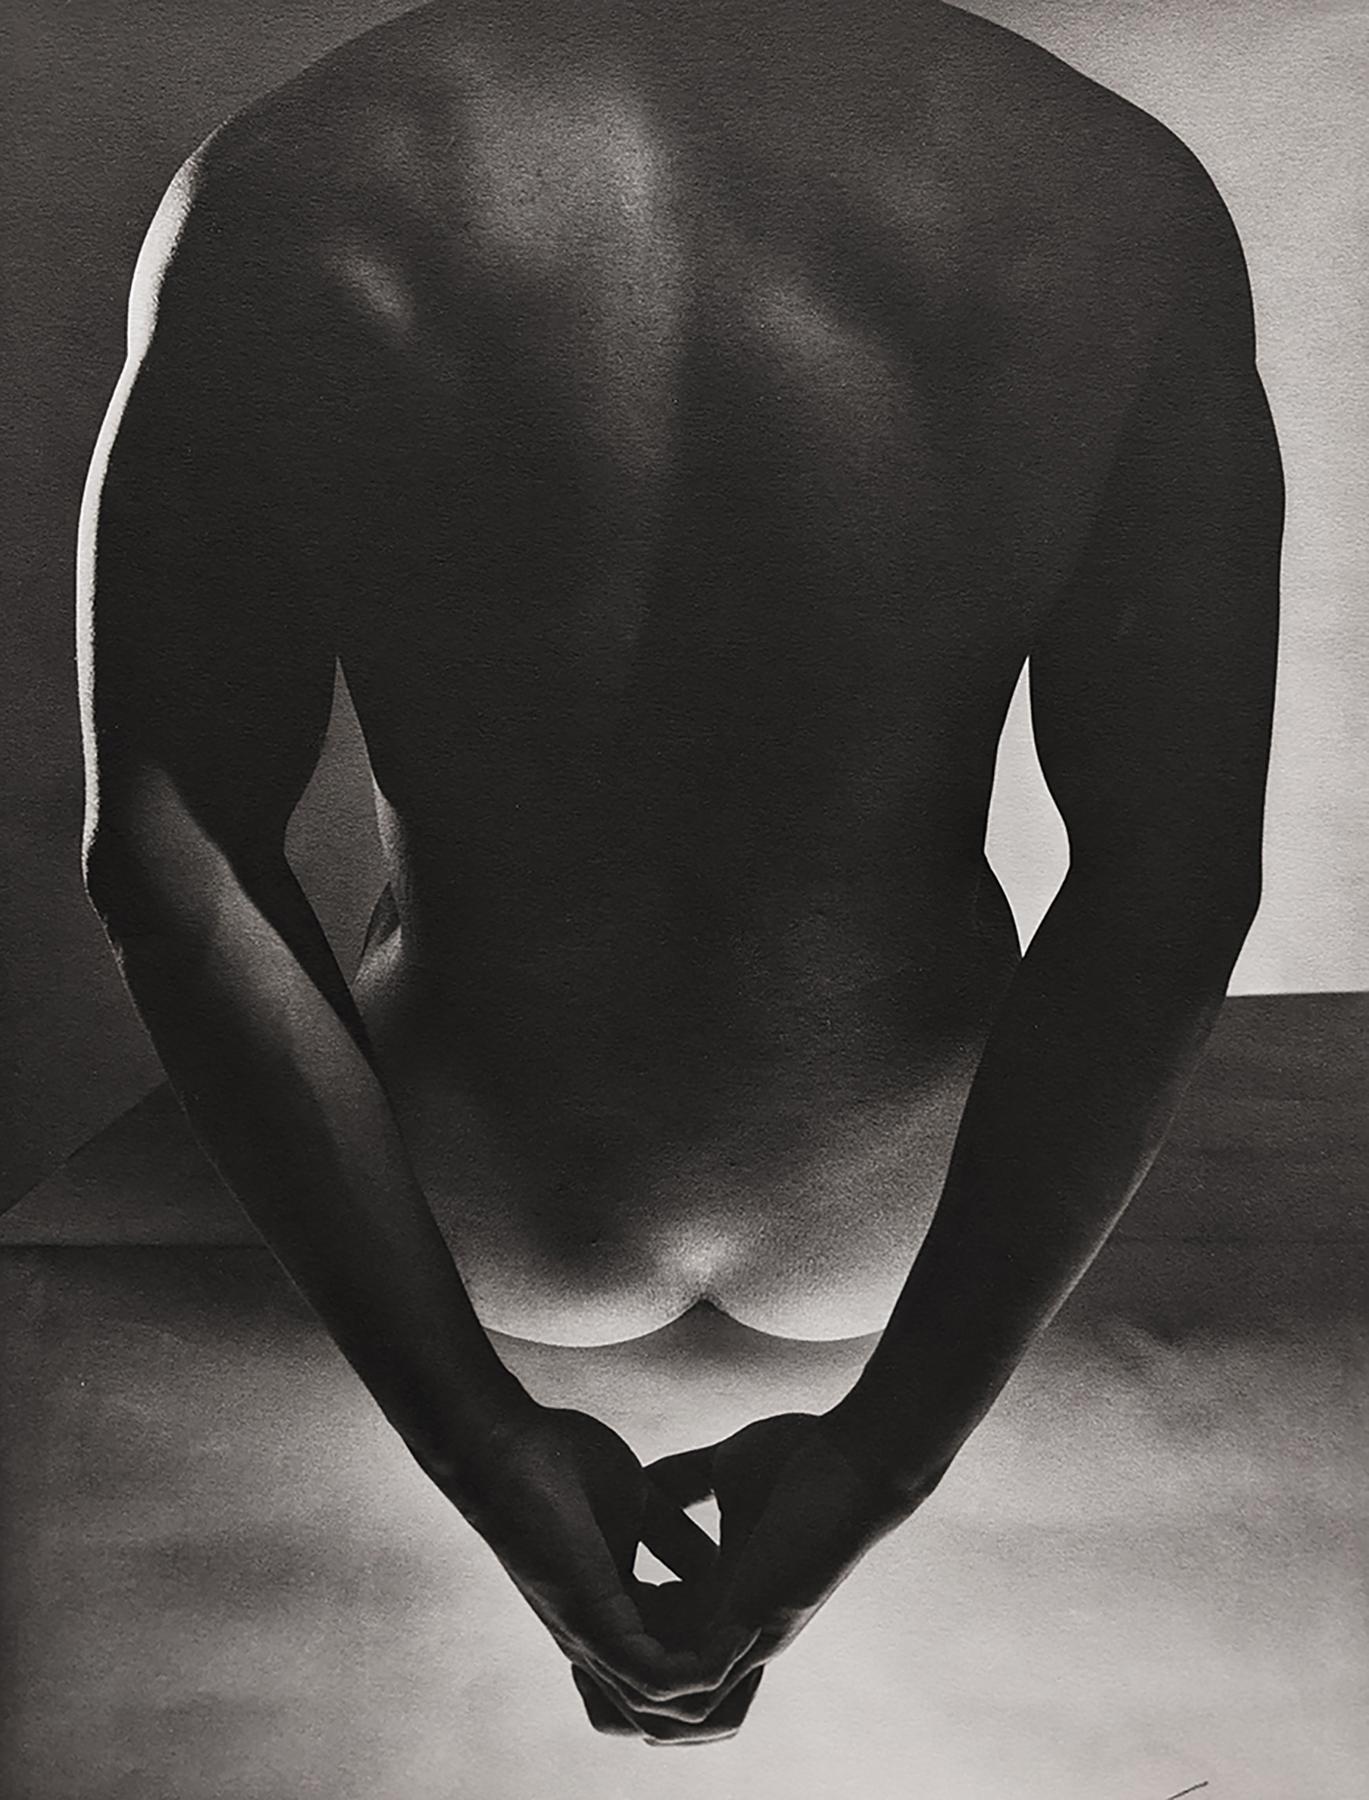 Horst P. Horst Black and White Photograph - Male Nude (Hands Behind Back)